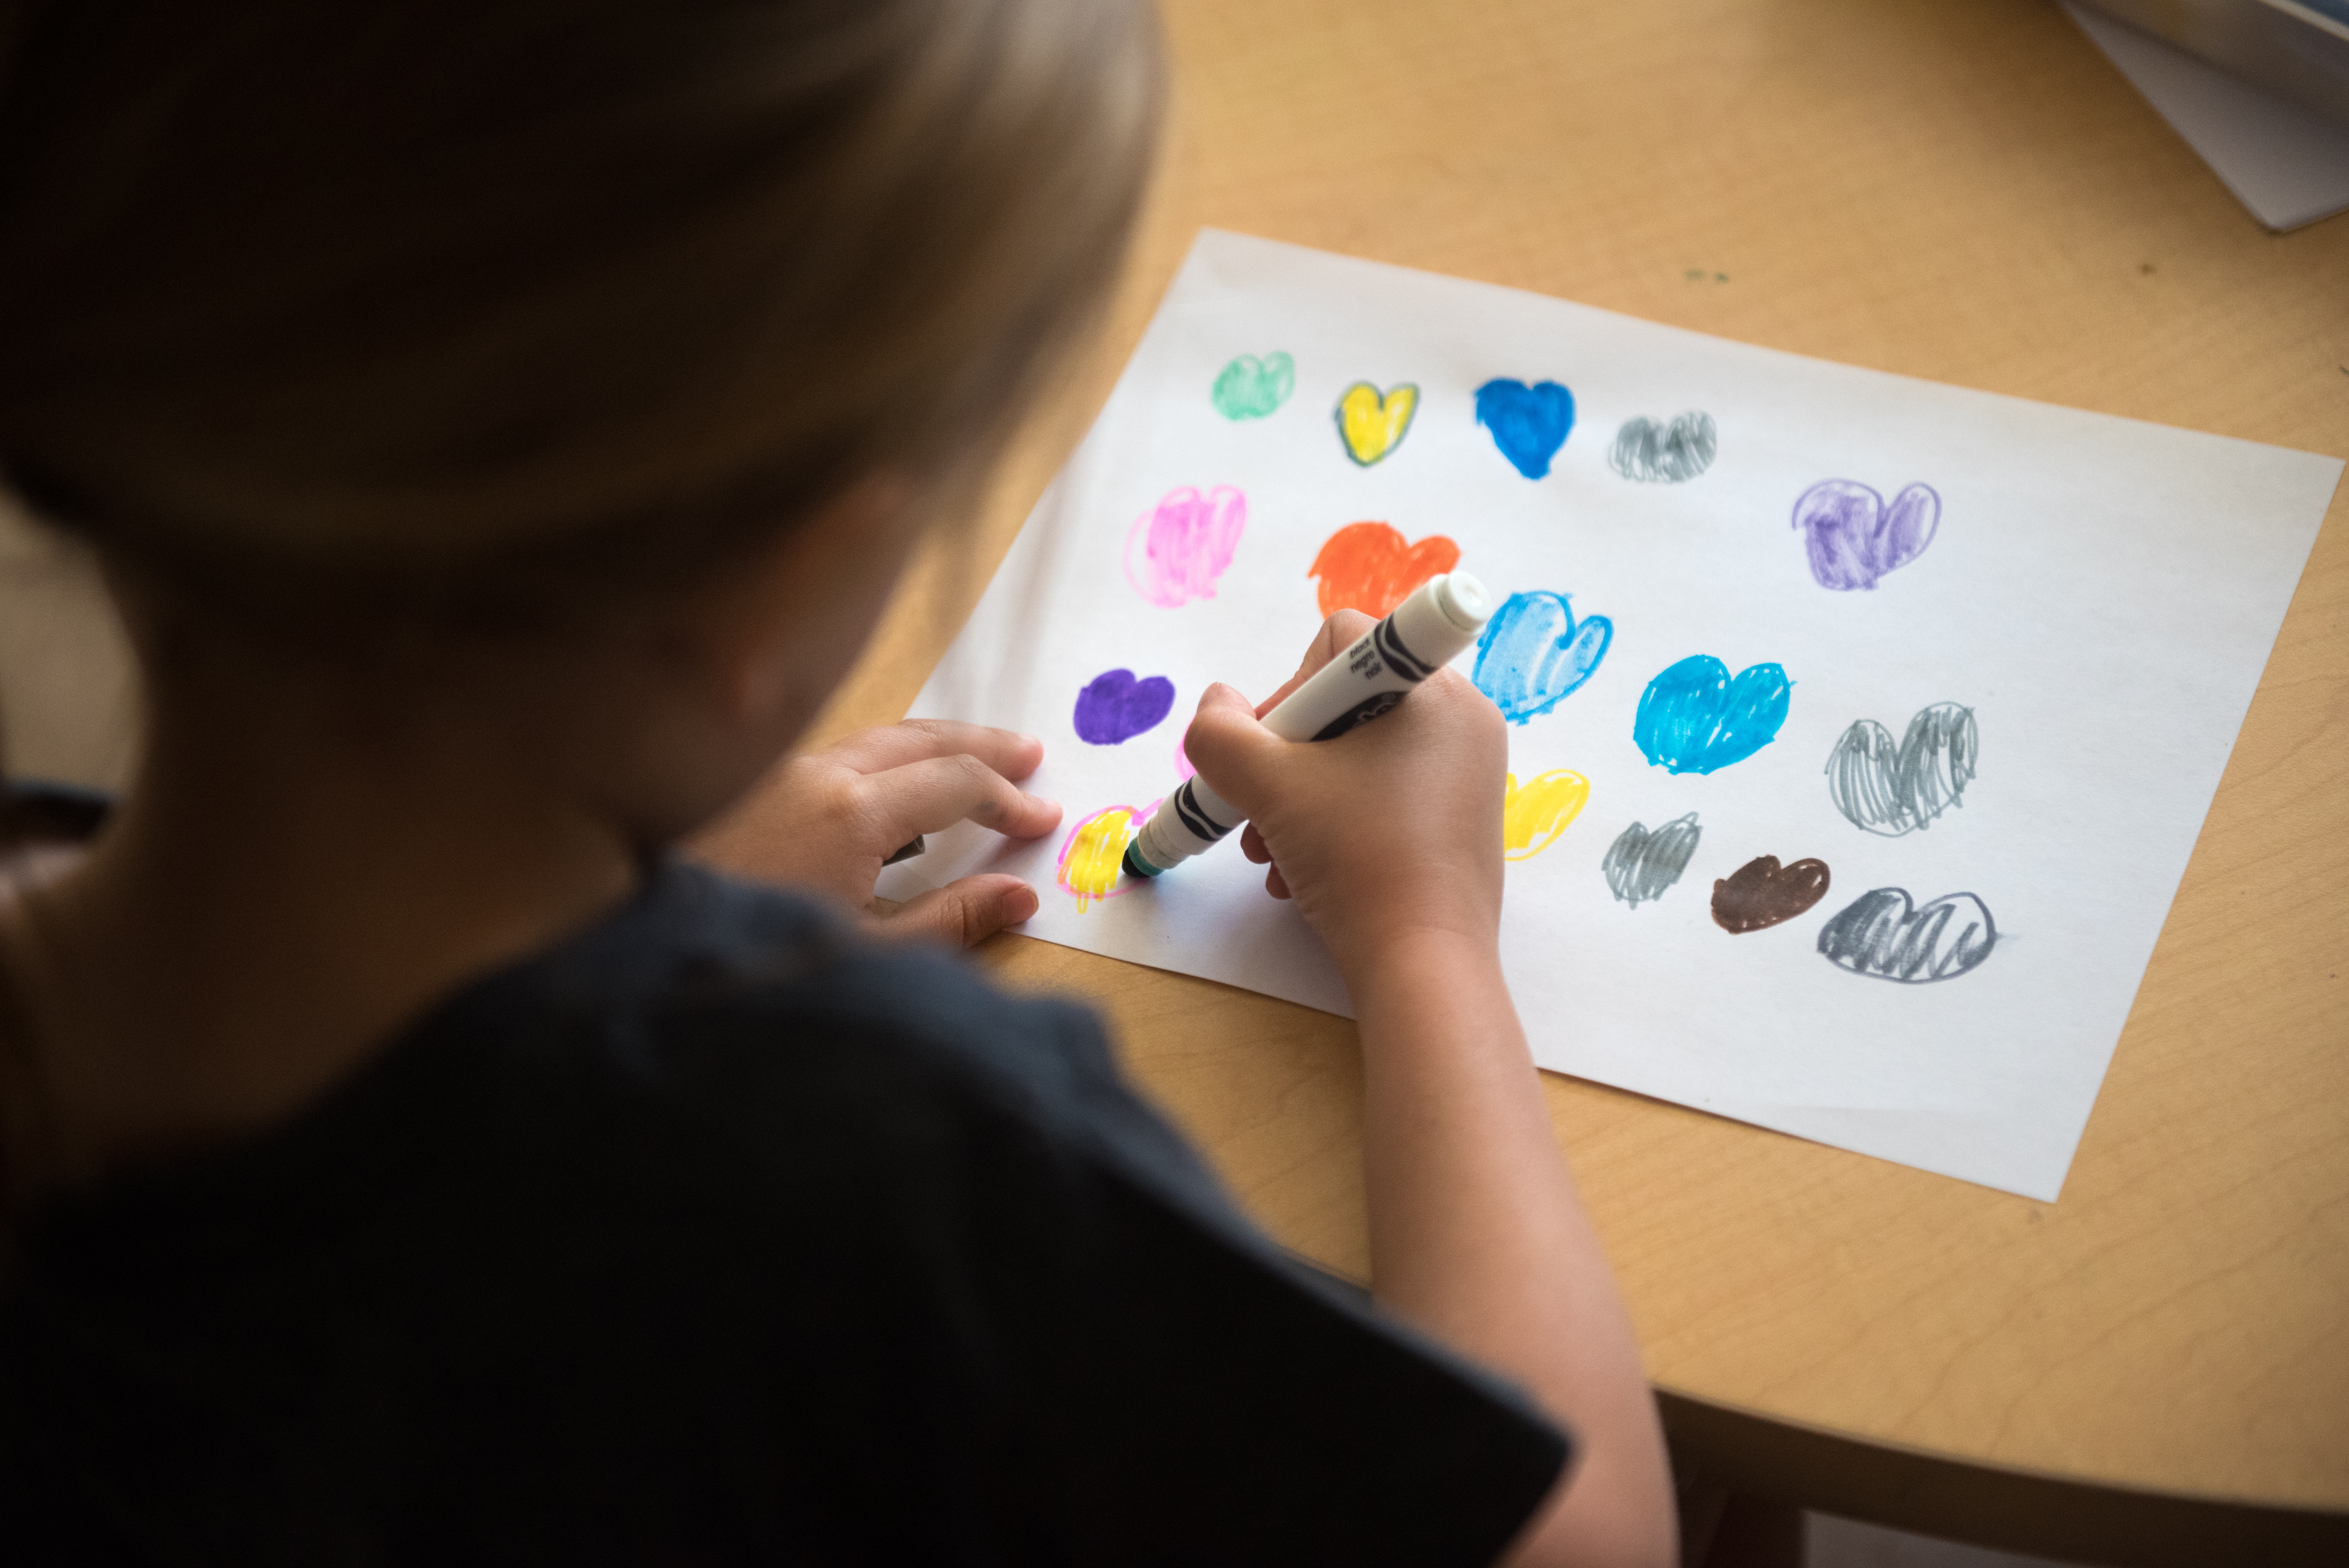 Looking over child's shoulder while she draws different colored hearts on a white sheet of paper.